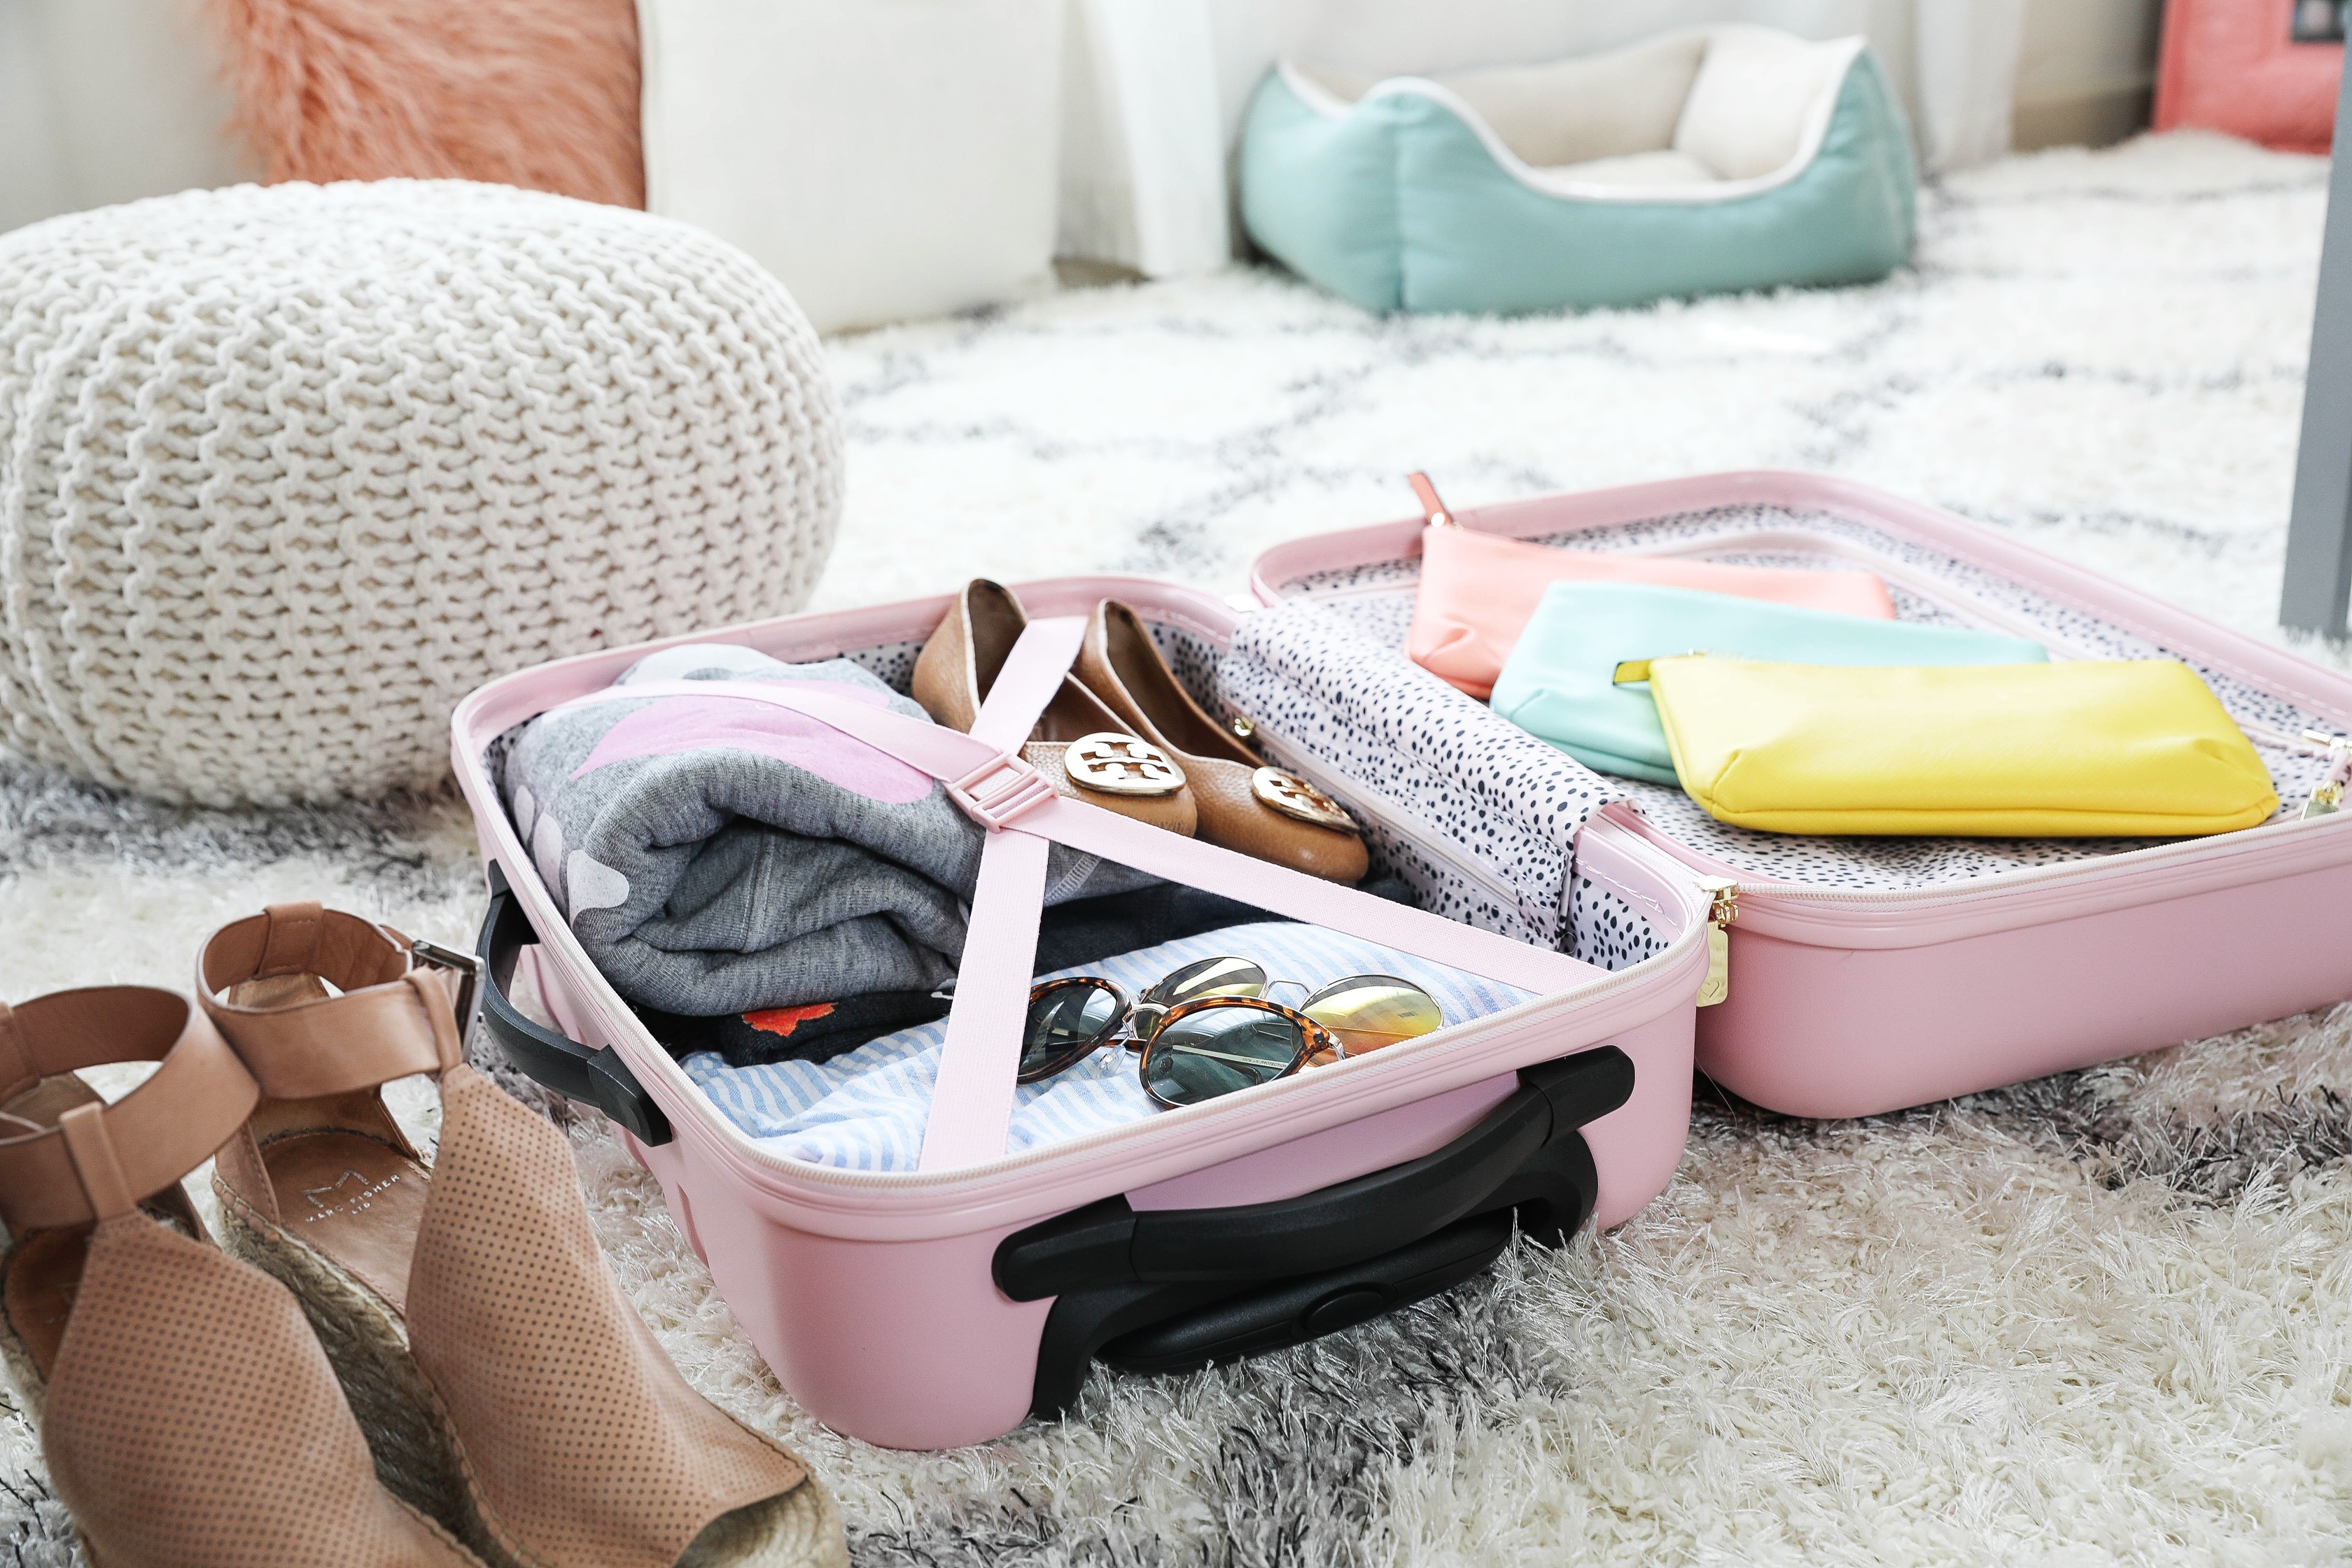 Packing tips and travel tips for frequent flyers! How to travel easier plus cute suitcases. On the blog Daily Dose of Charm by Lauren Lindmark dailydoseofcharm.com